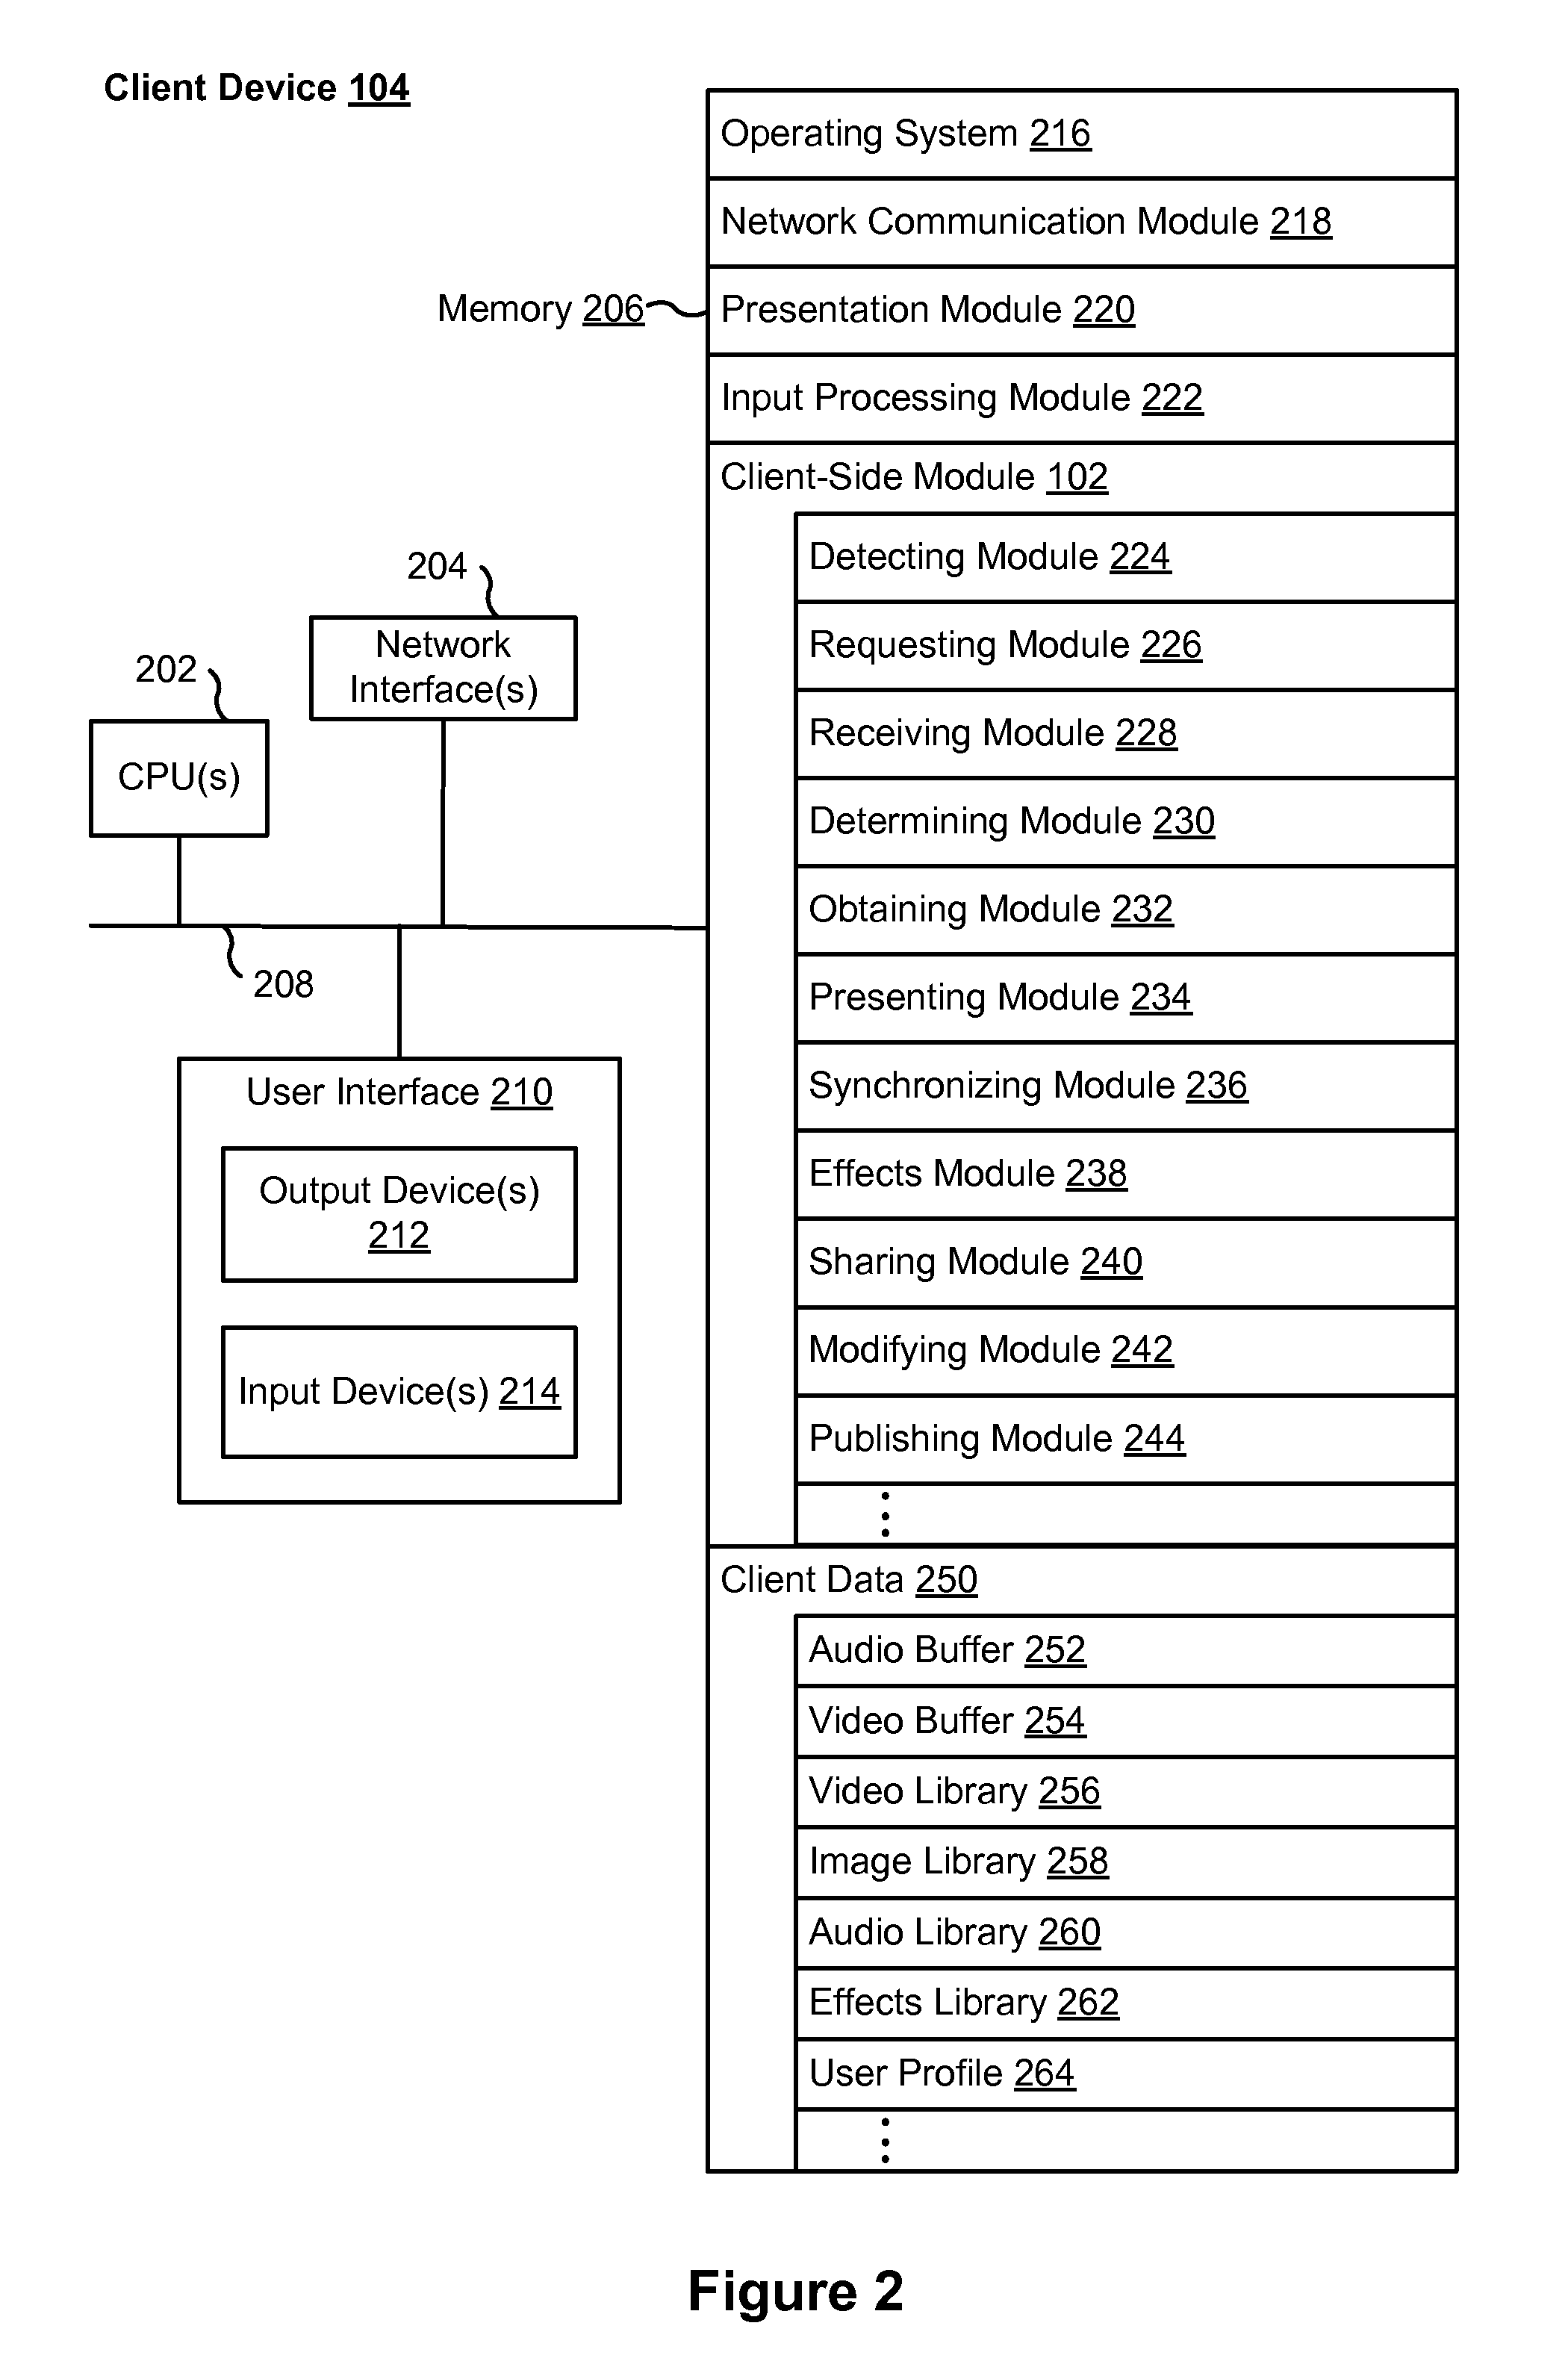 Methods and devices for modifying pre-existing media items